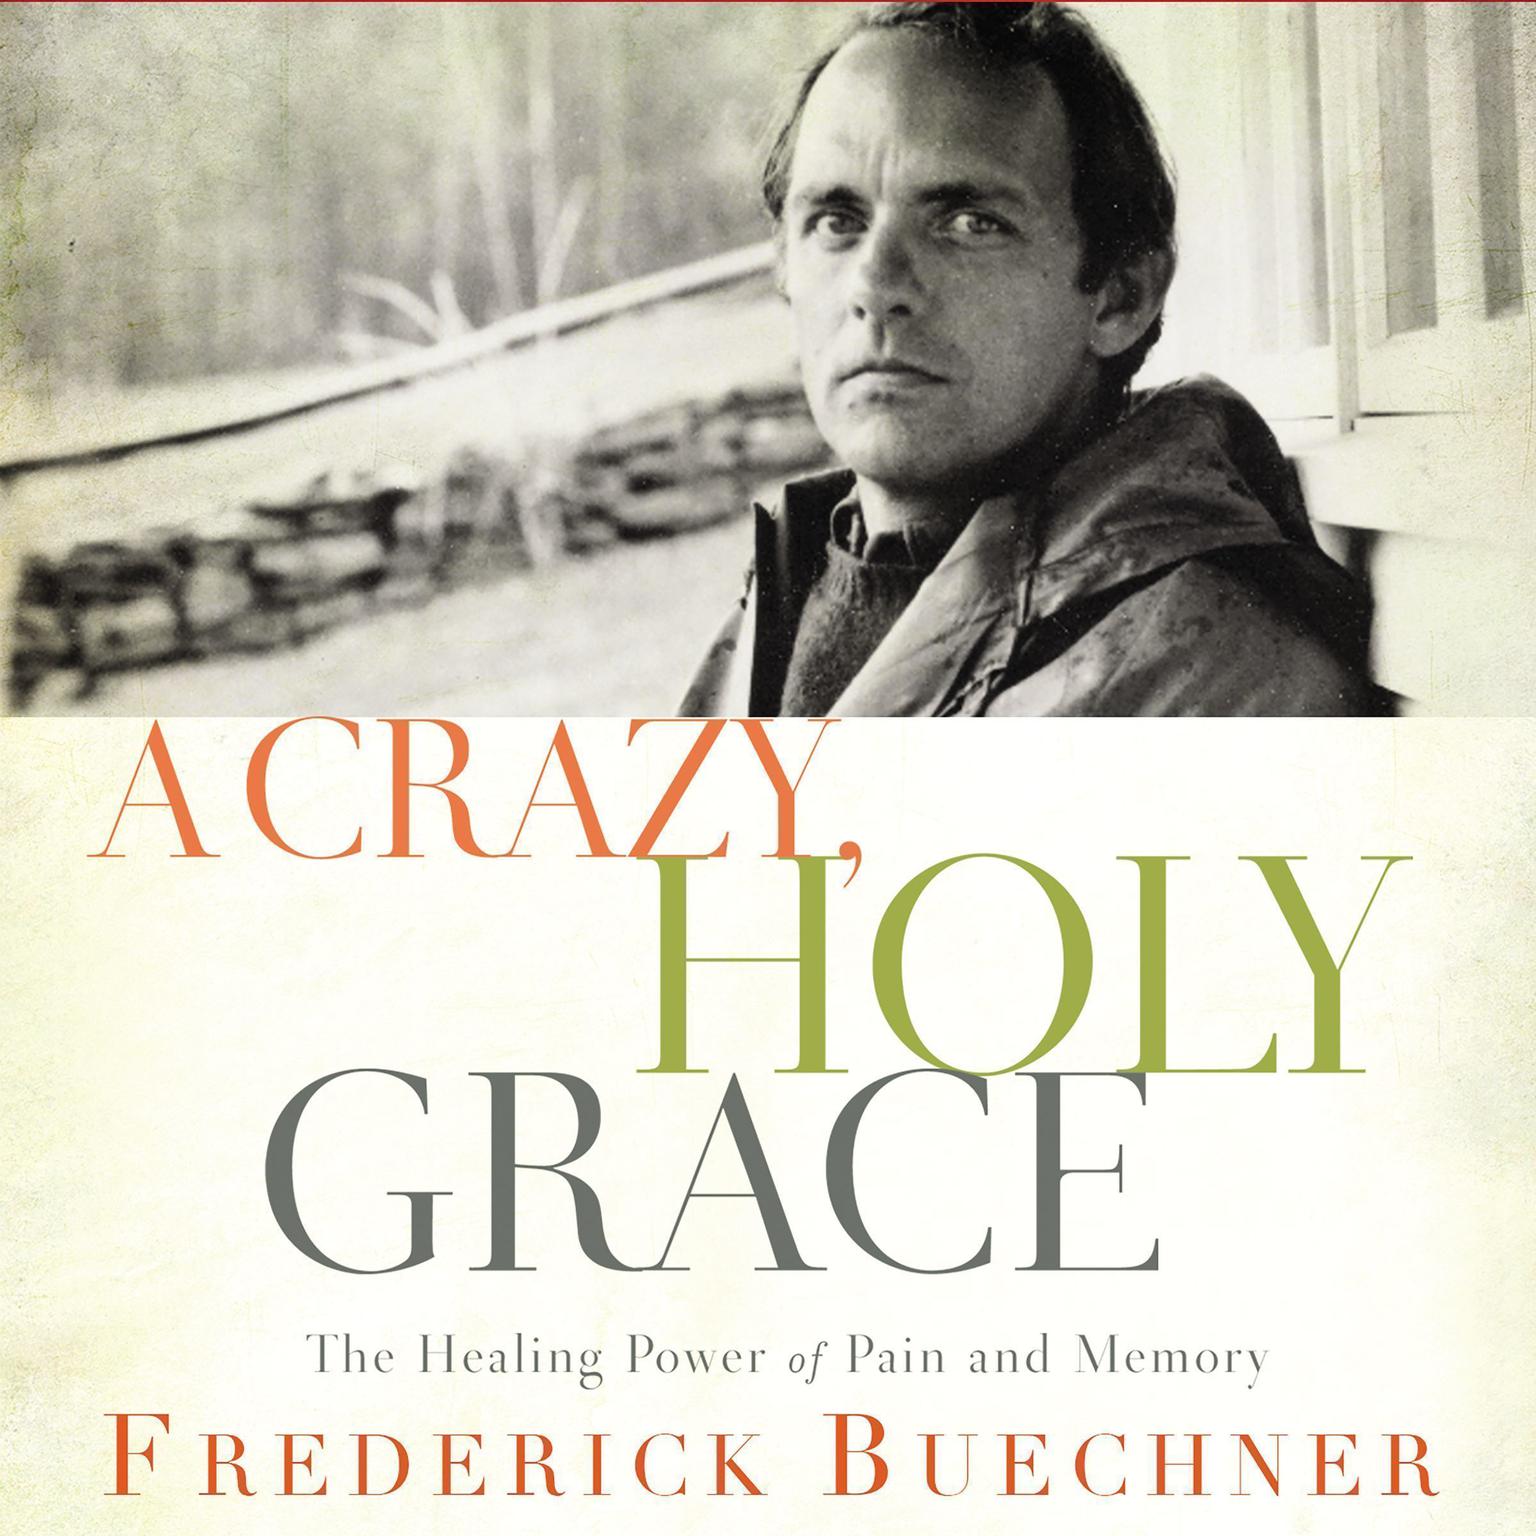 A Crazy, Holy Grace: The Healing Power of Pain and Memory Audiobook, by Frederick Buechner